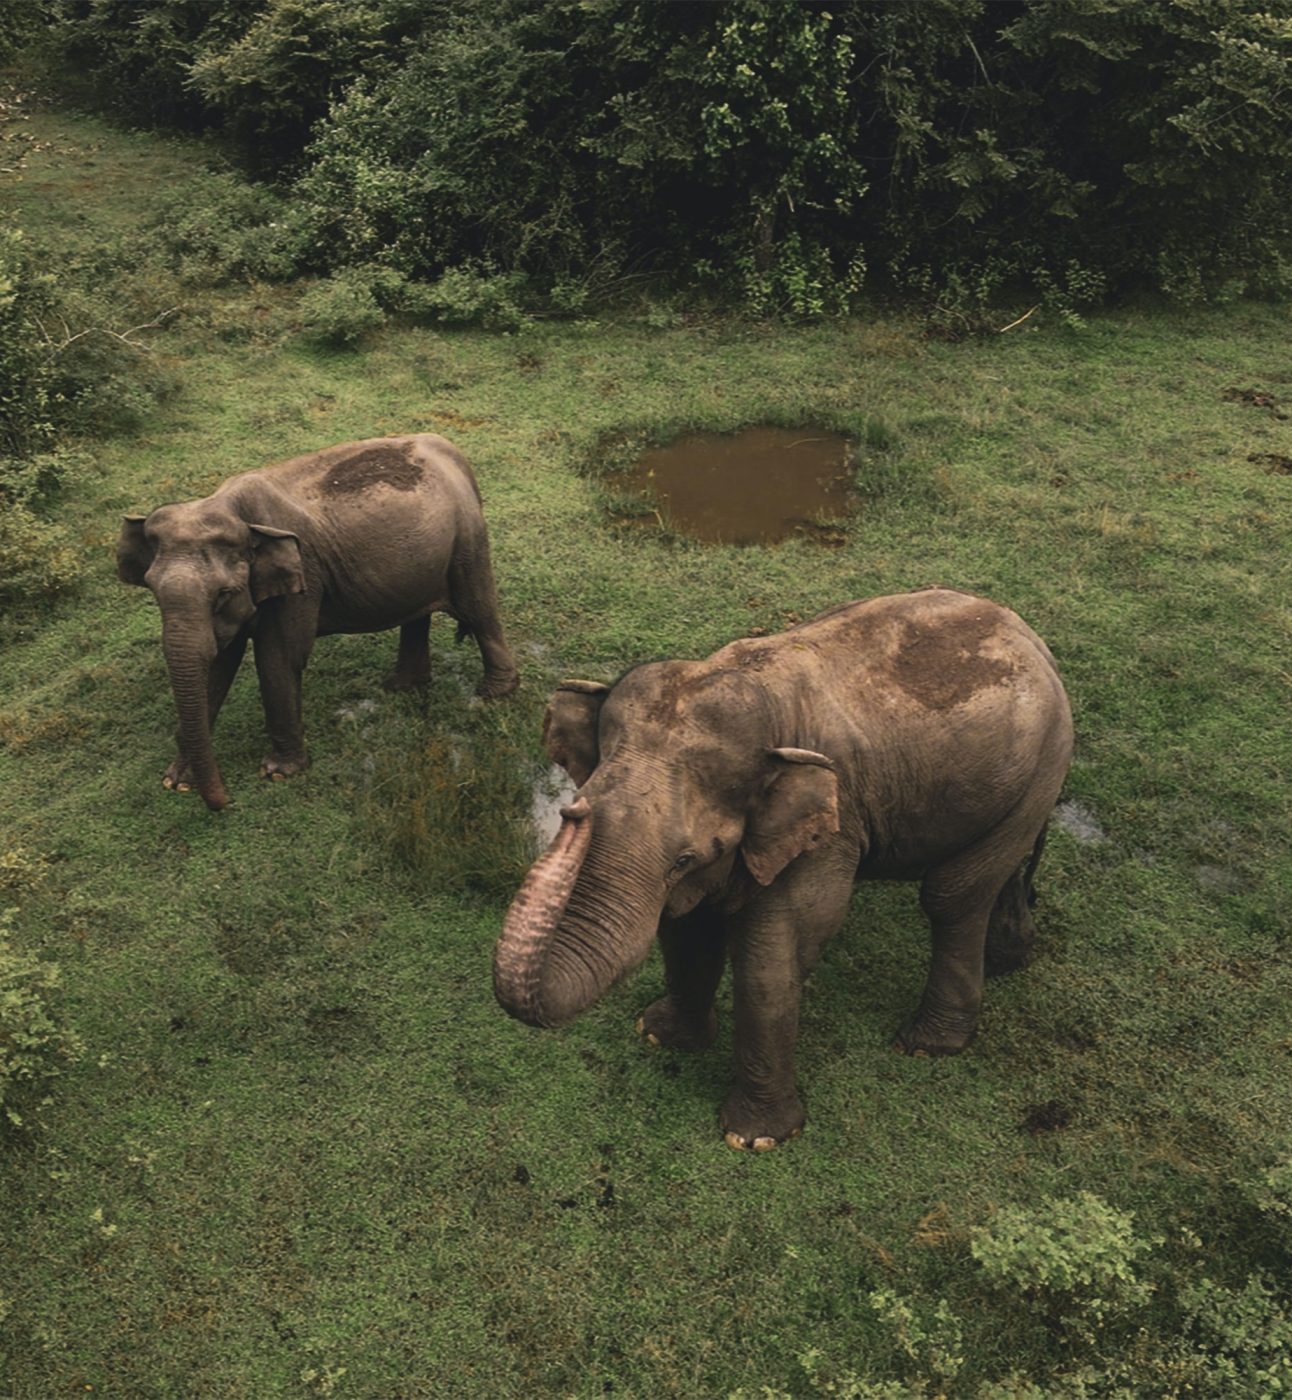 Two Asian elephants photographed from above surrounded by shrubs and grass